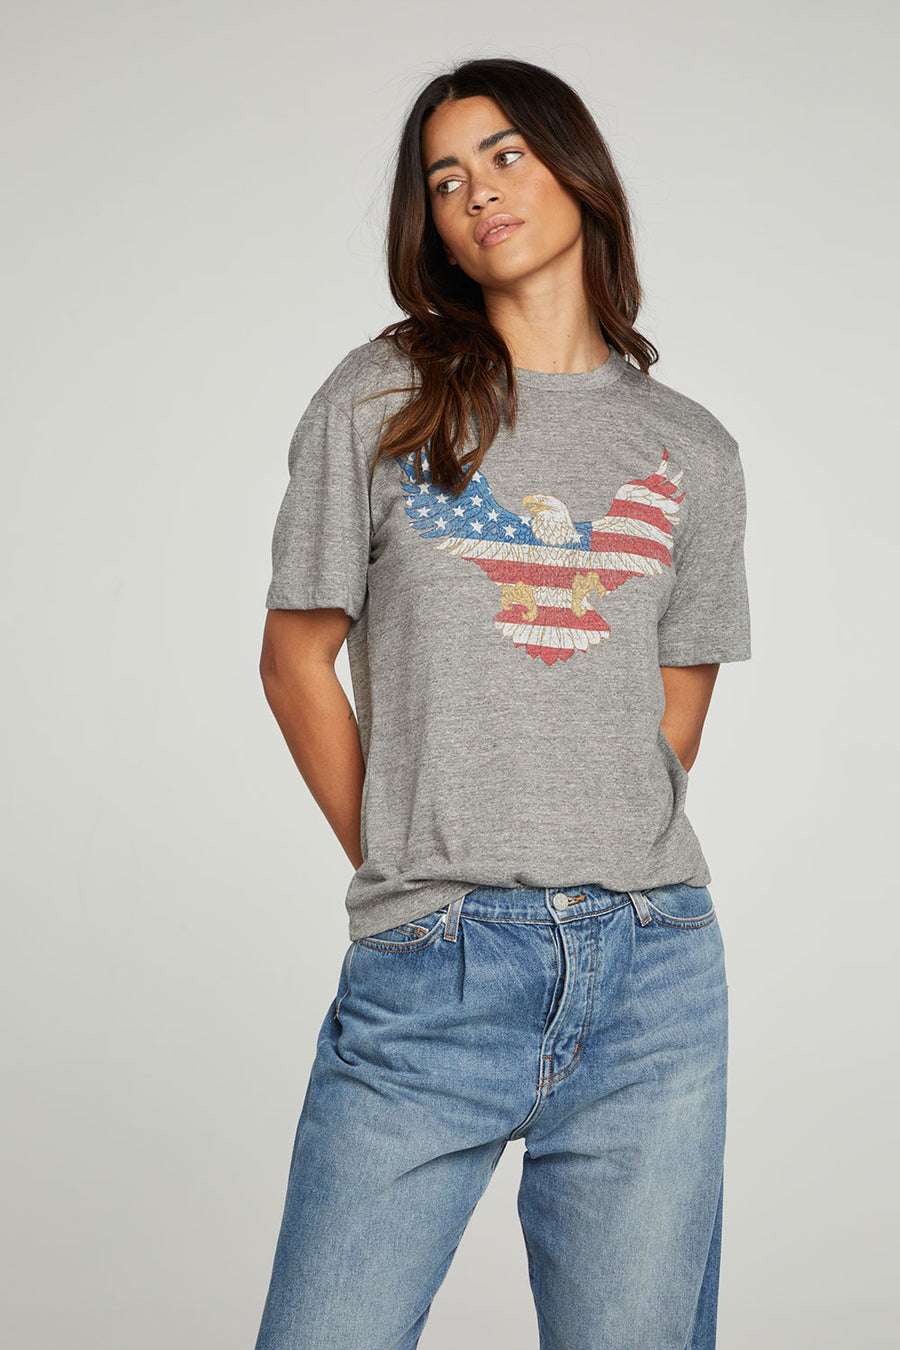 Eagle Patriot WOMENS chaserbrand